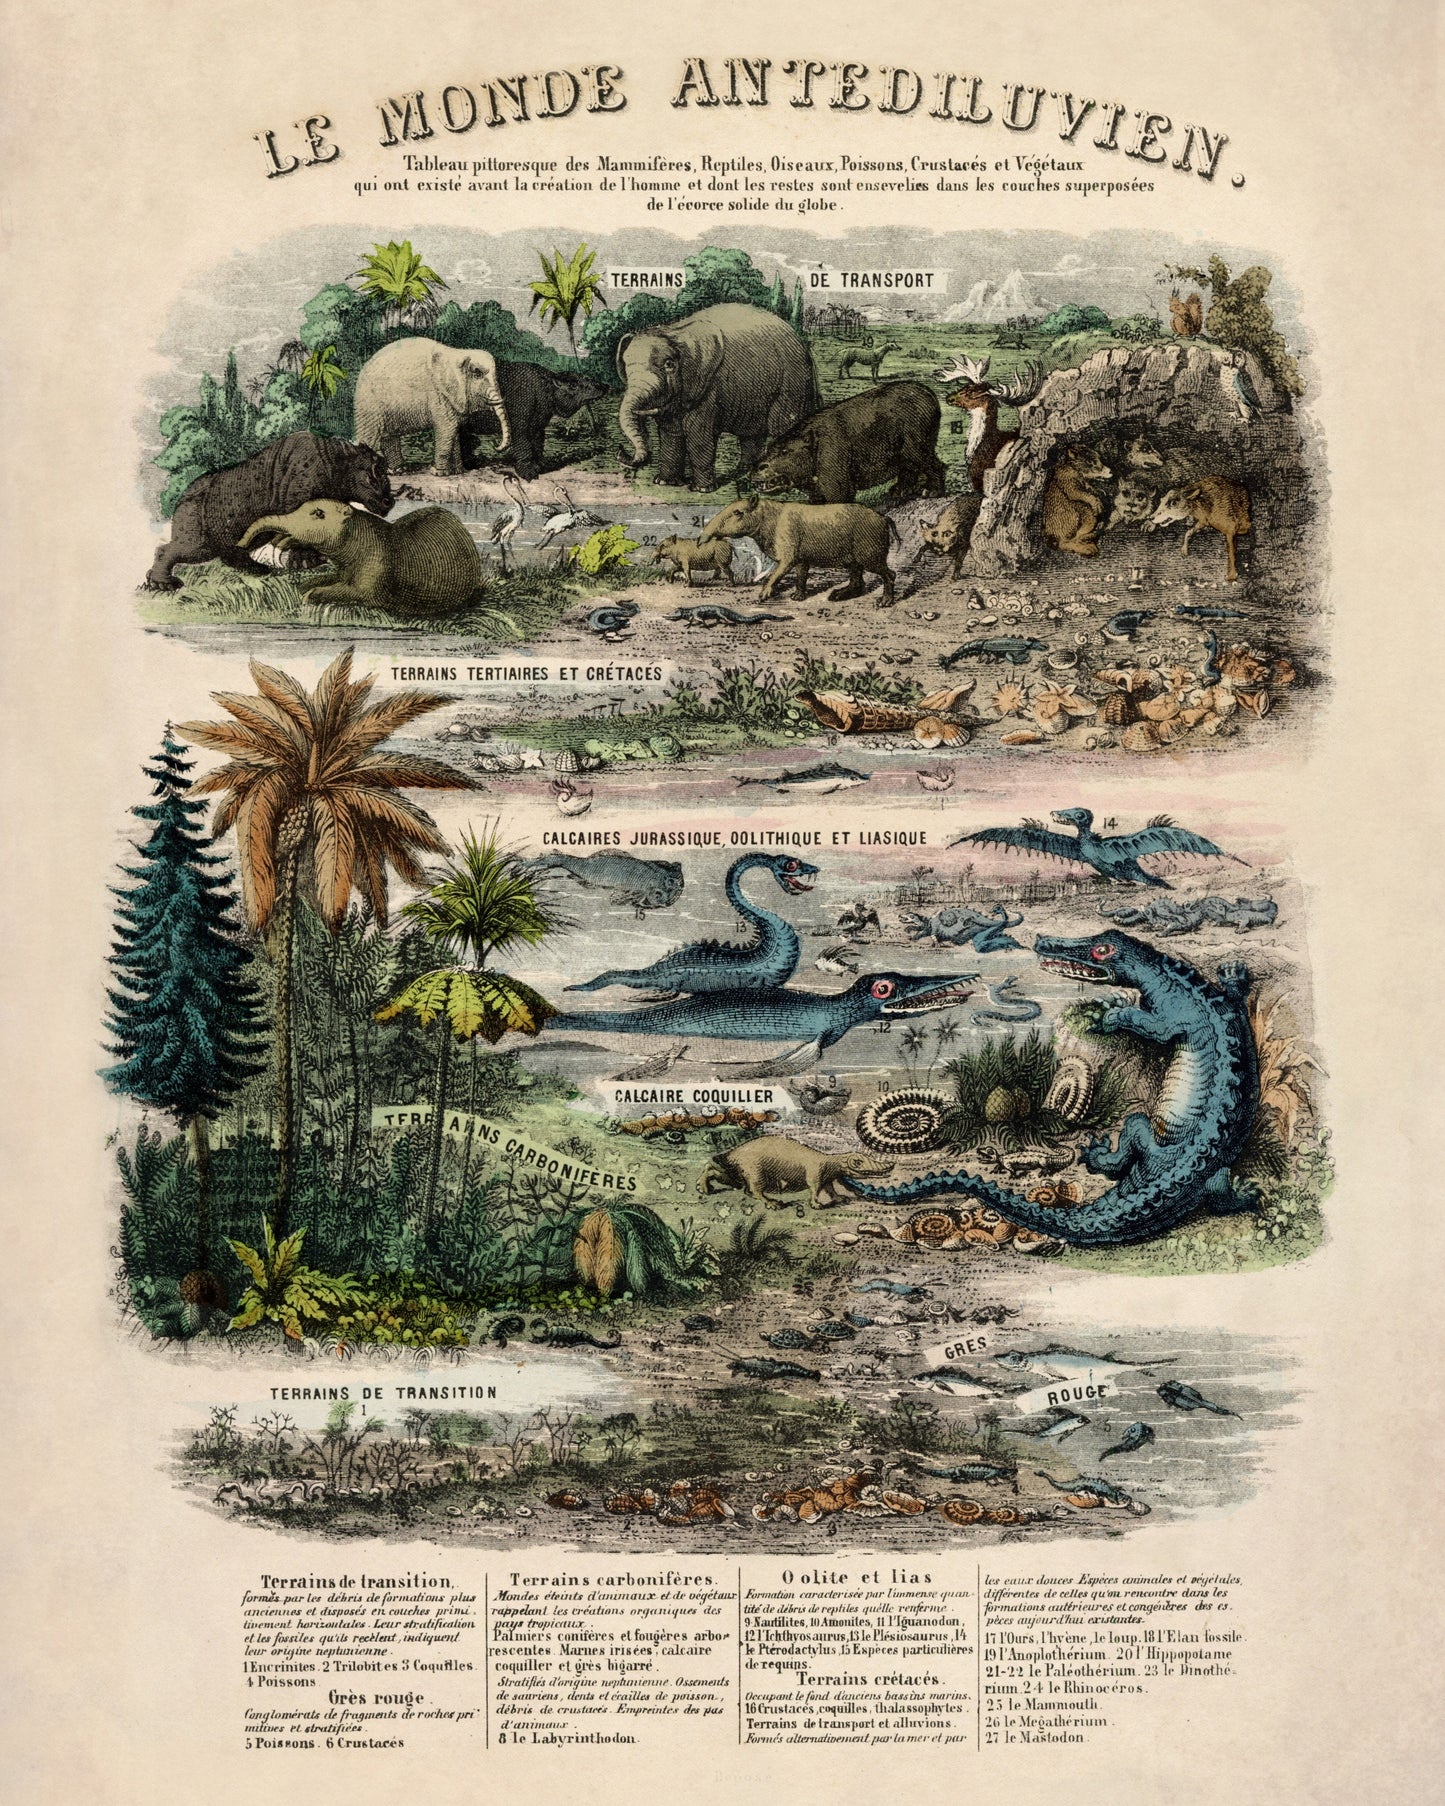 The Antediluvian World - Antique Reproduction - Palaentology - Fossil - Geology - Britain - Available Framed